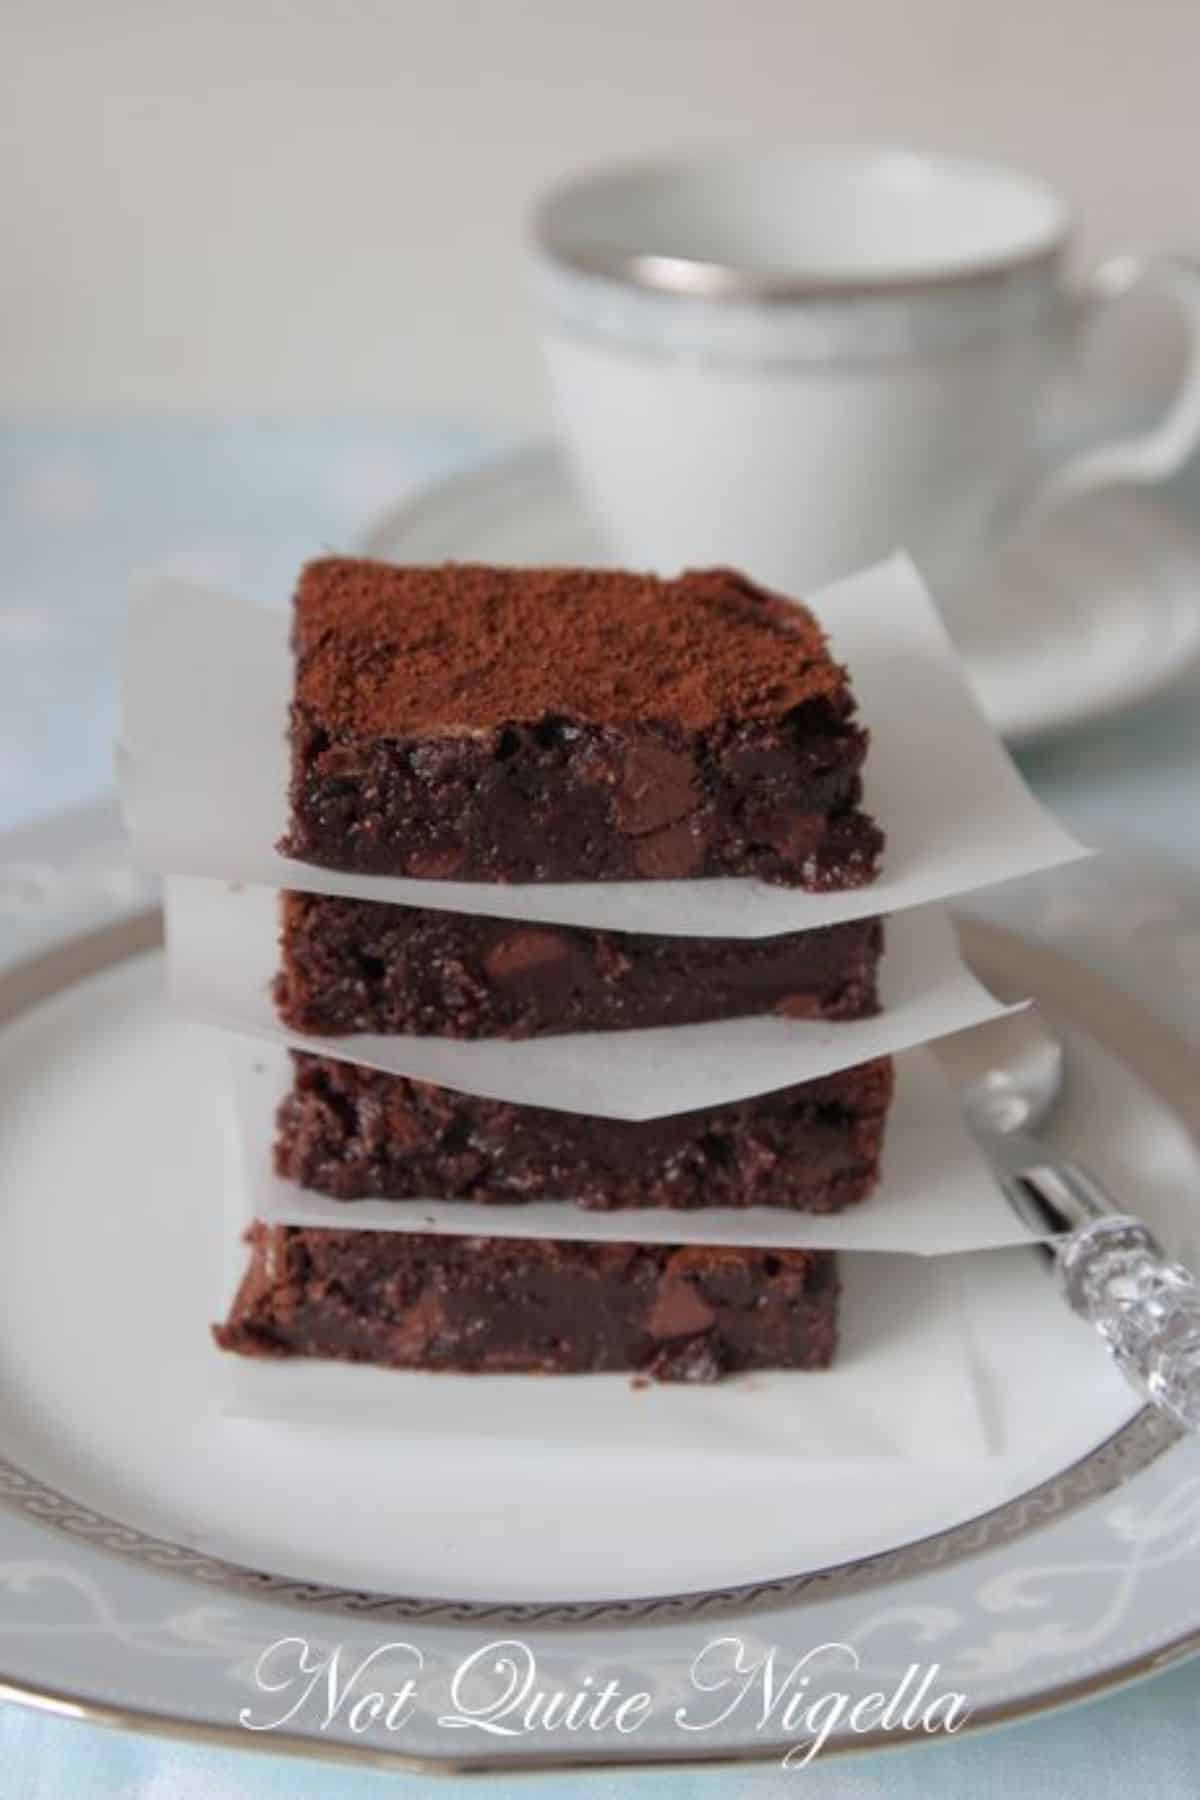 A pile of chocolate chestnut brownies on a plate.